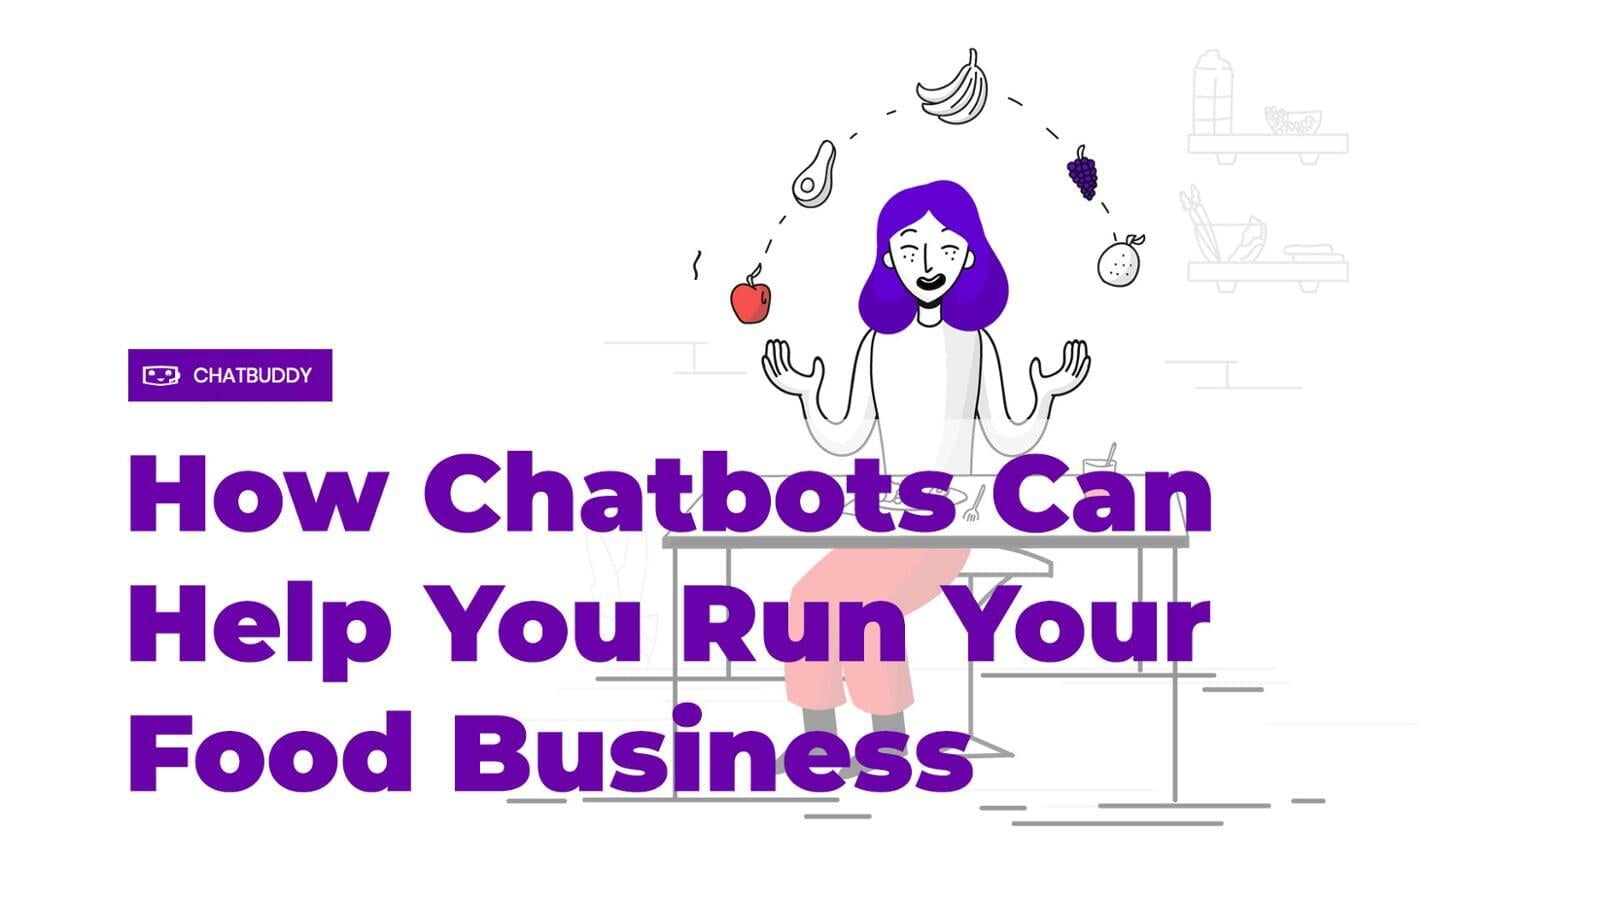 How Chatbots Can Help You Run Your Food Business